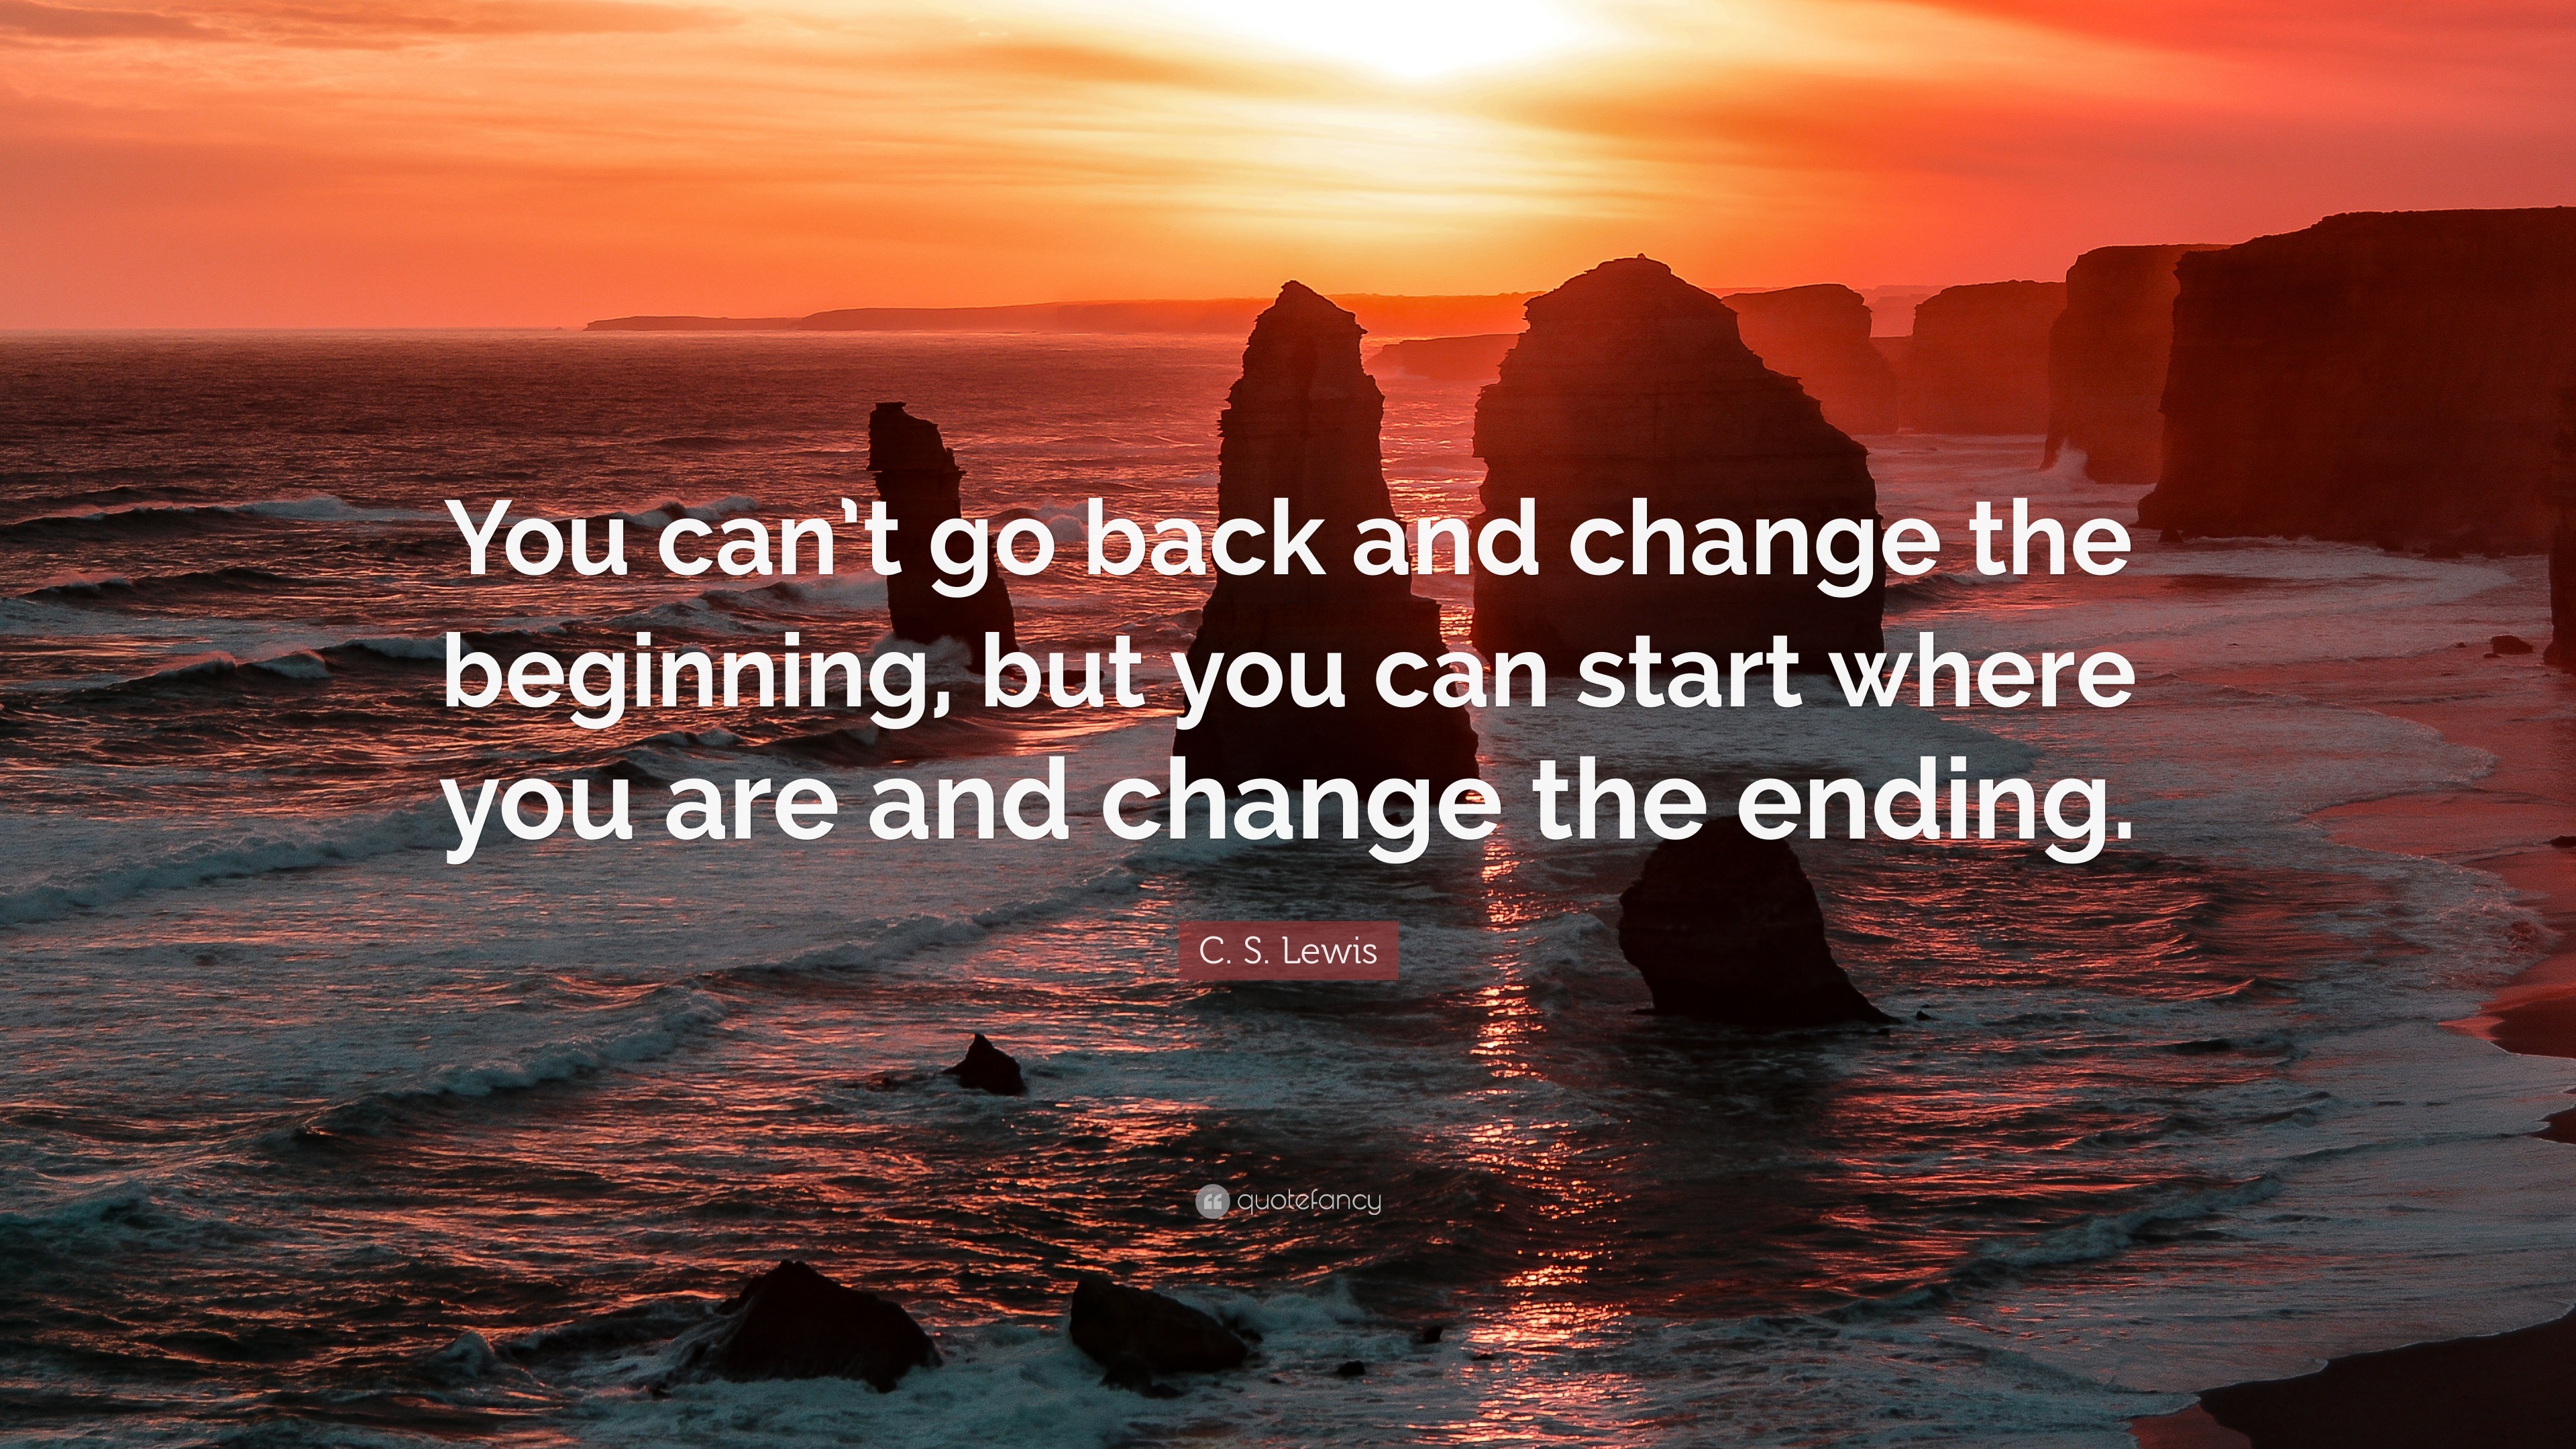 We can start our. Can you change. Start where you are. You can't change me фото. Are you beginning.